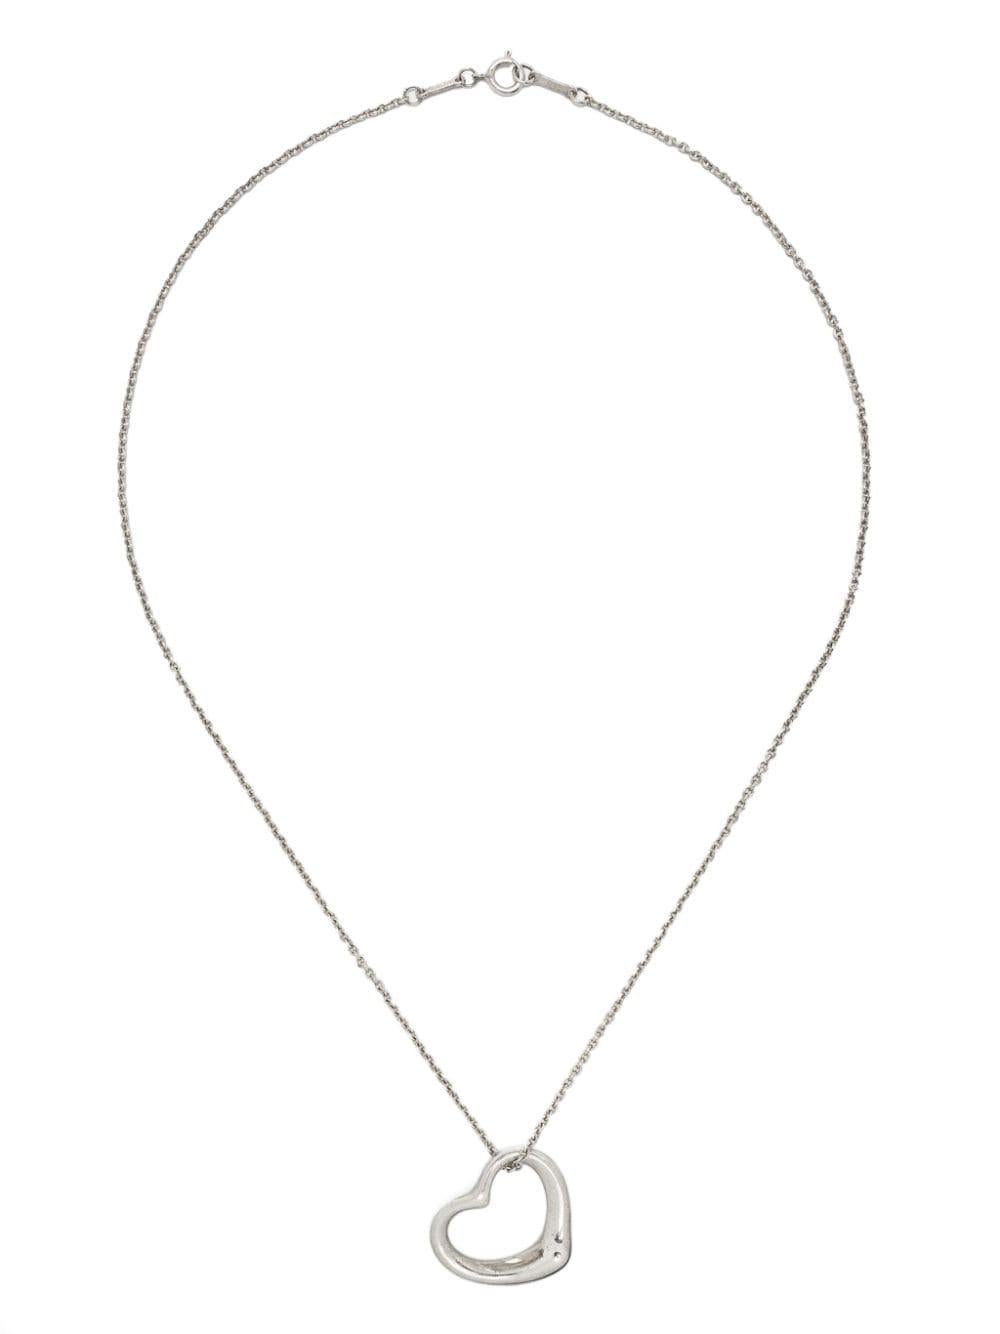 Tiffany & co by Elsa Perreti Open Heart Silver Sterling Necklace For Sale 1